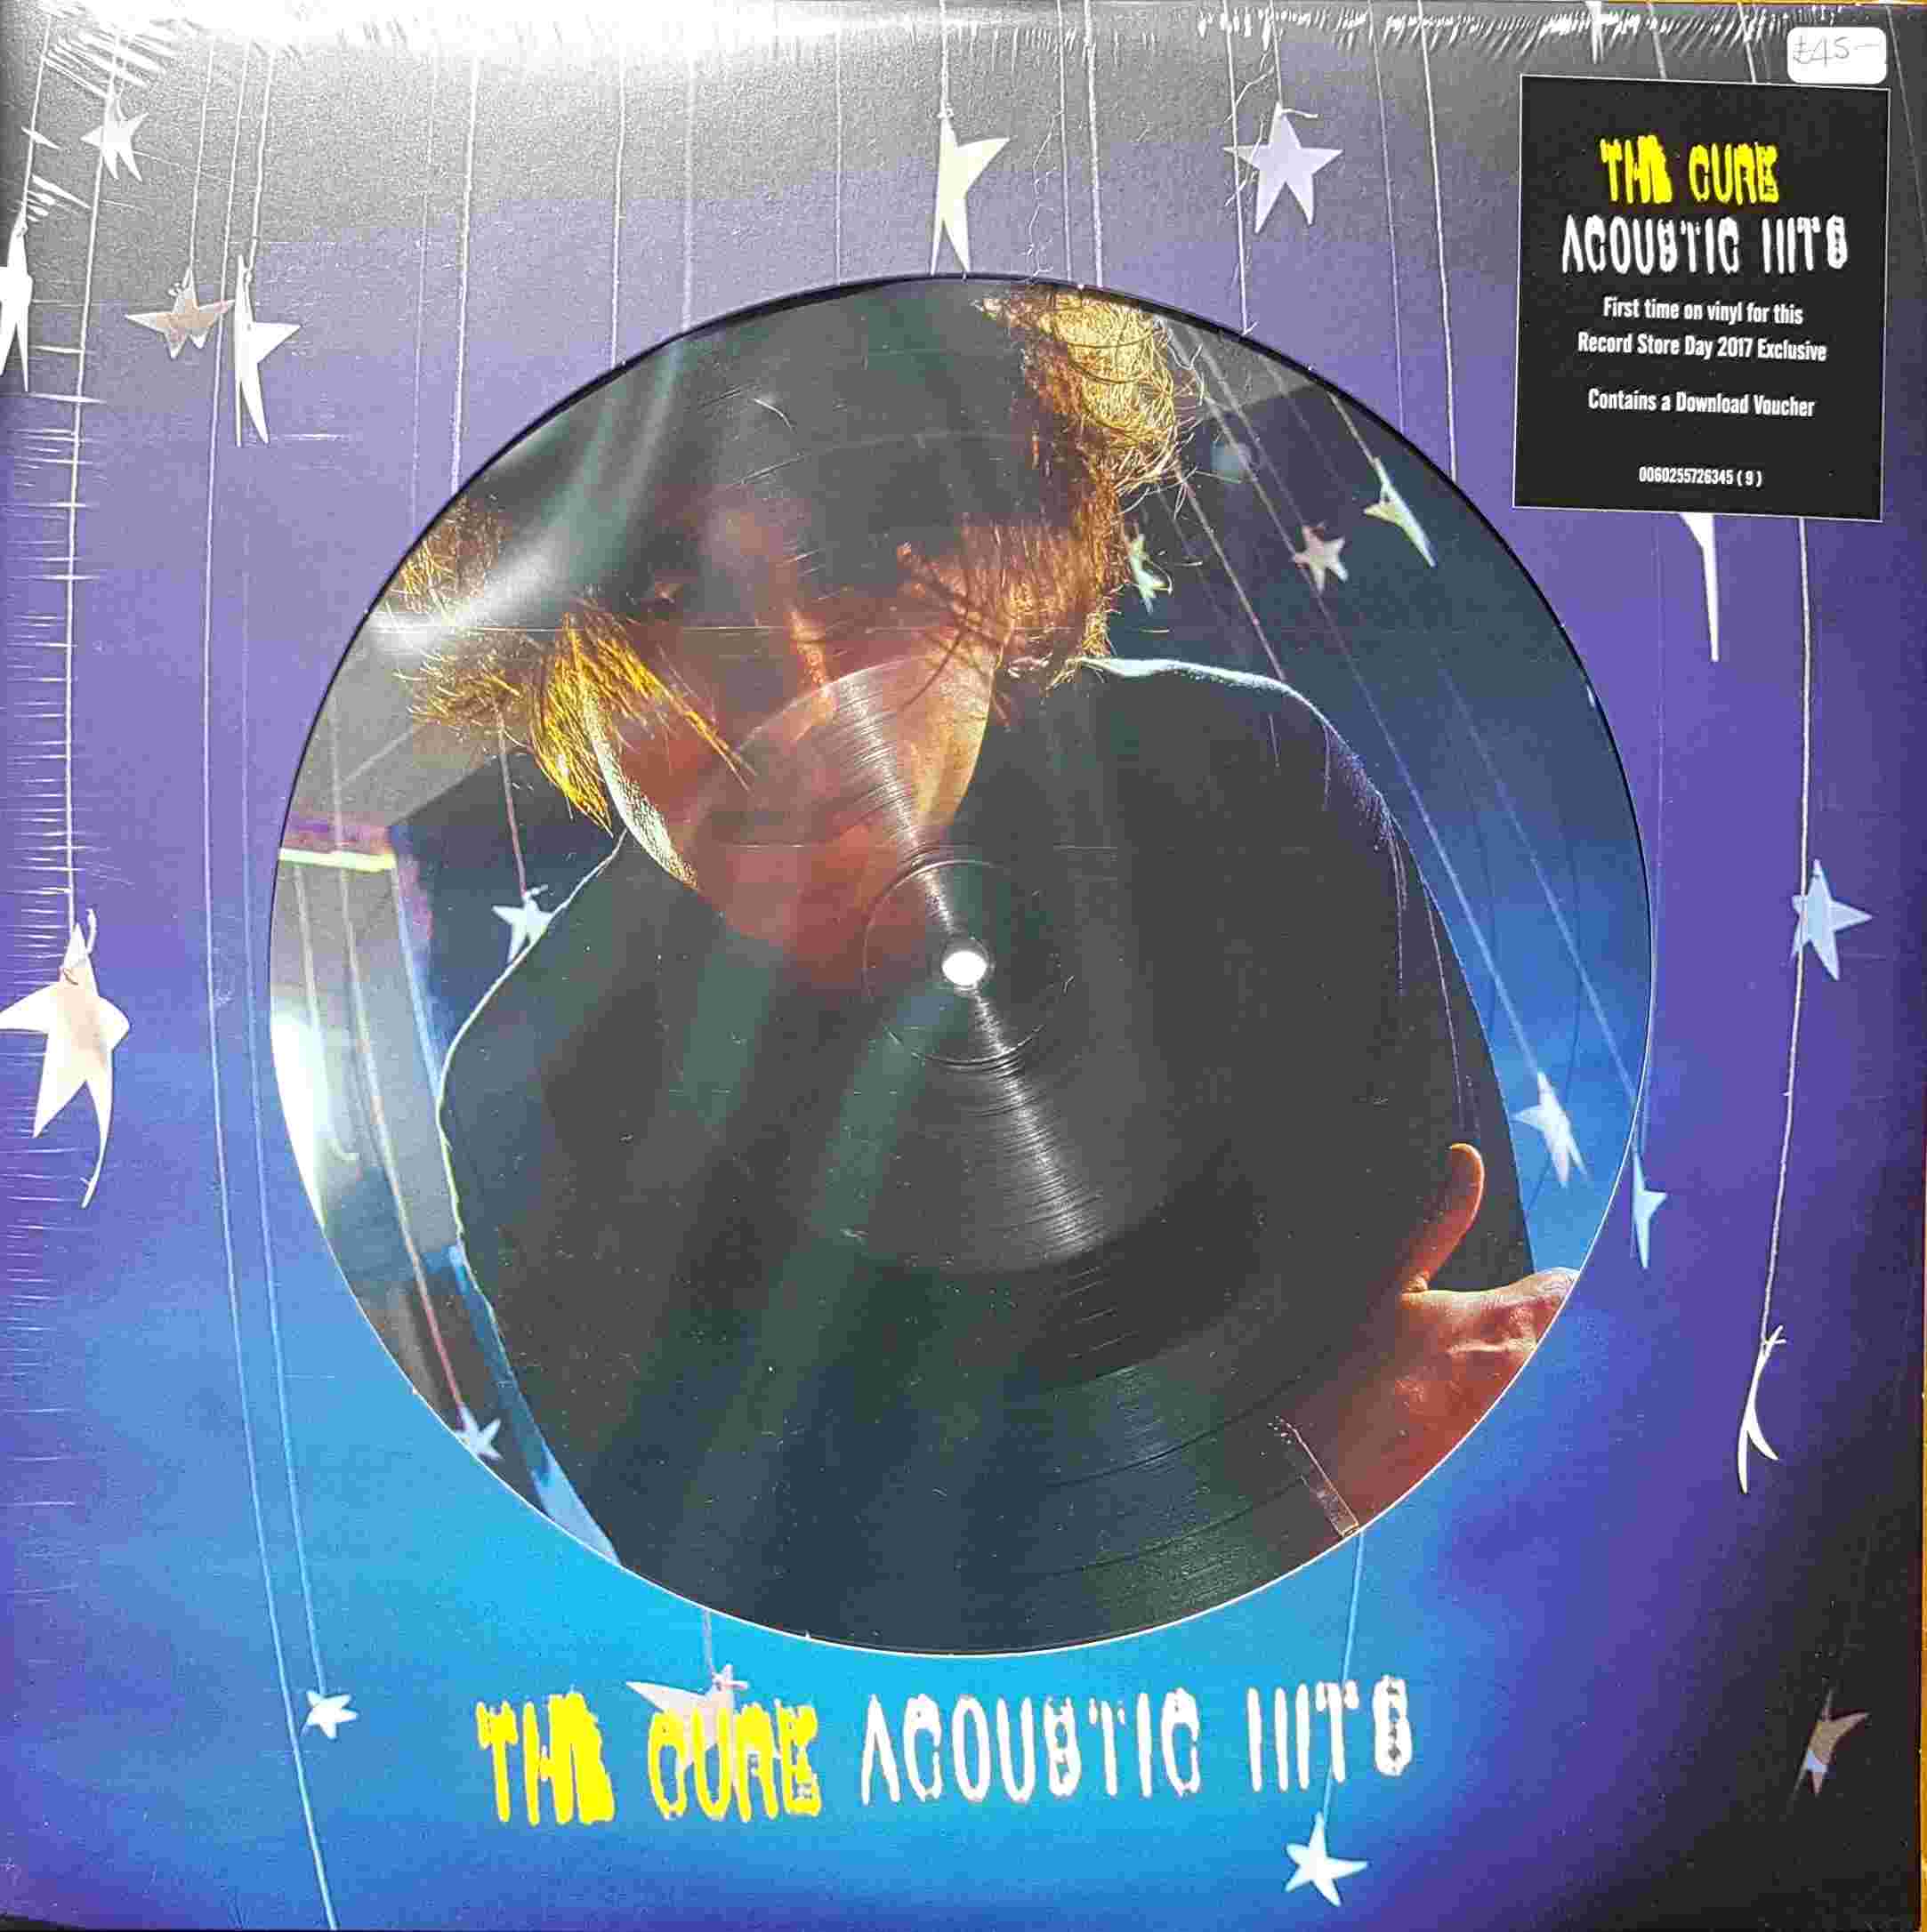 Picture of Acoustic hits - Record Store Day 2017 by artist The Cure  